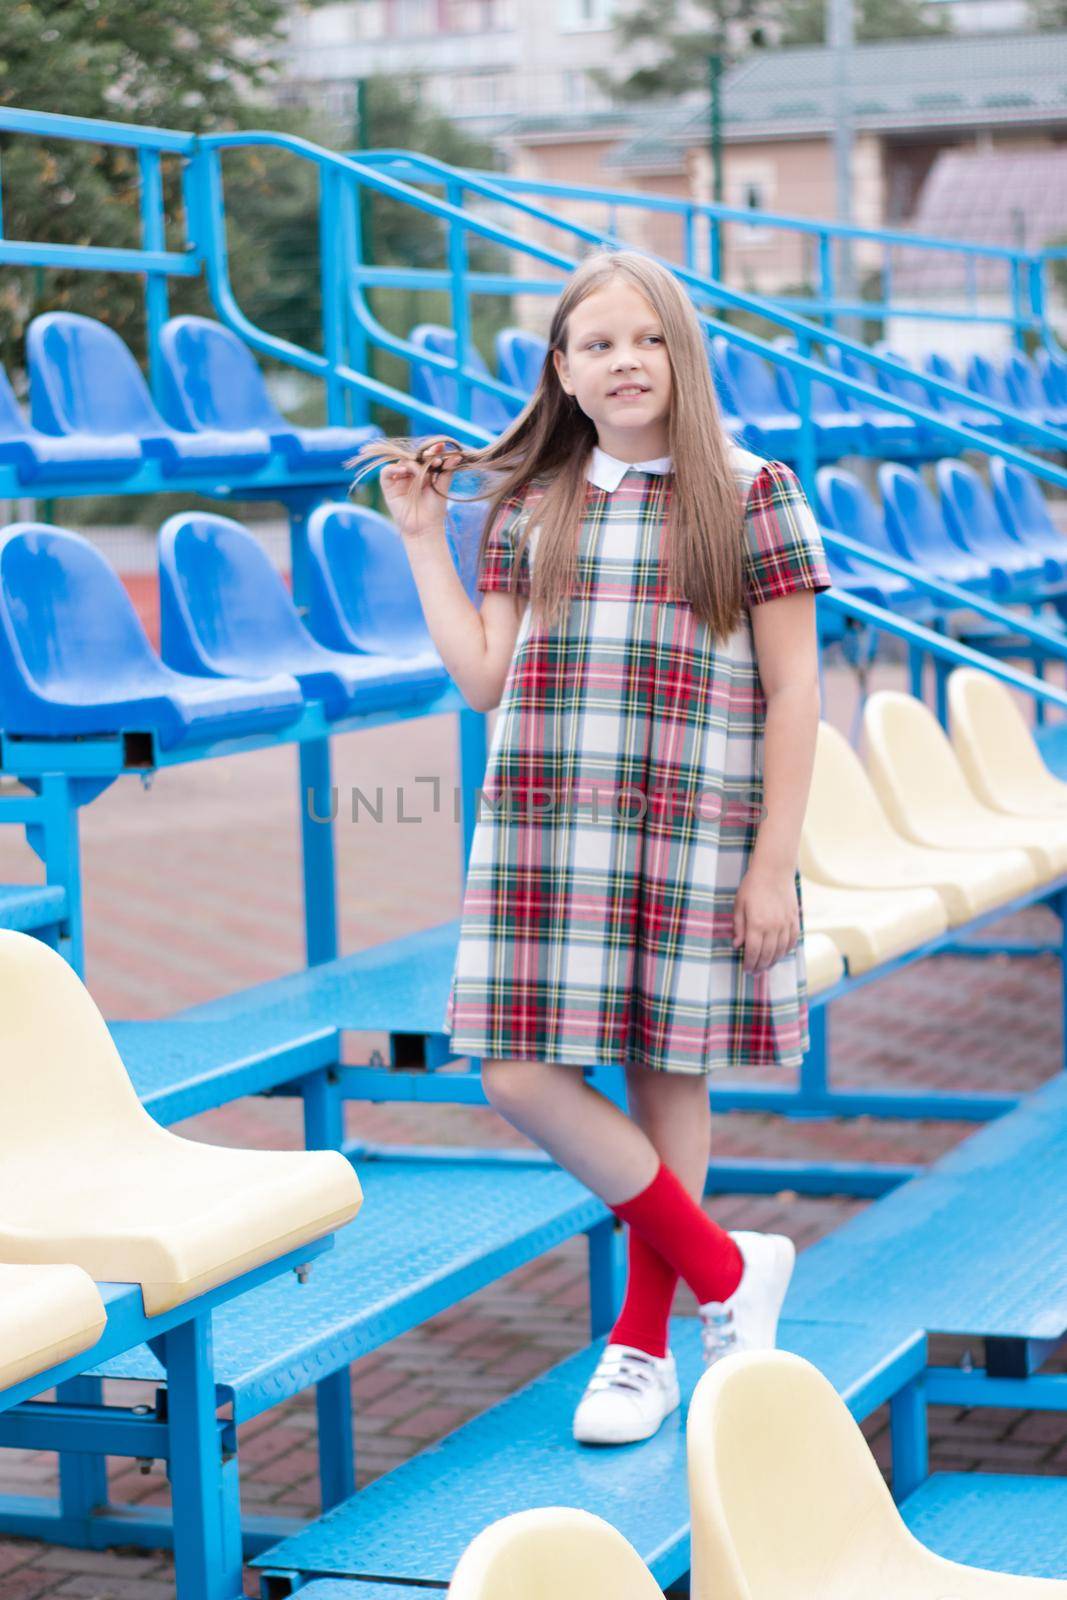 Stadium tribune. tweet brunette girl in dress near Tribunes and plastic colorful chairs in the sports stadium. by oliavesna